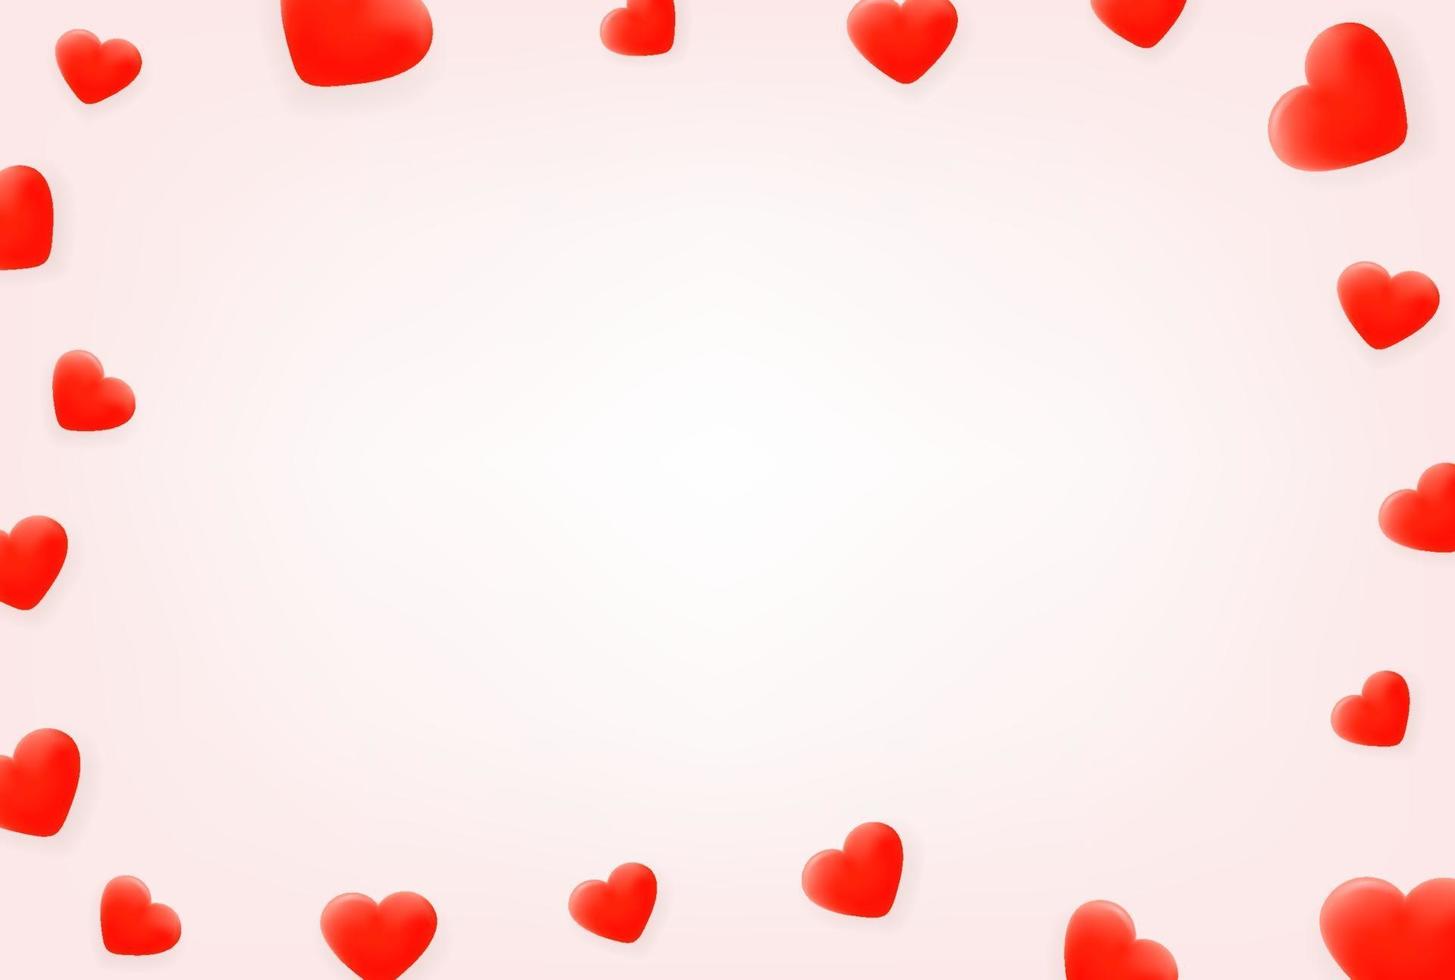 Wallpaper frame with red hearts vector